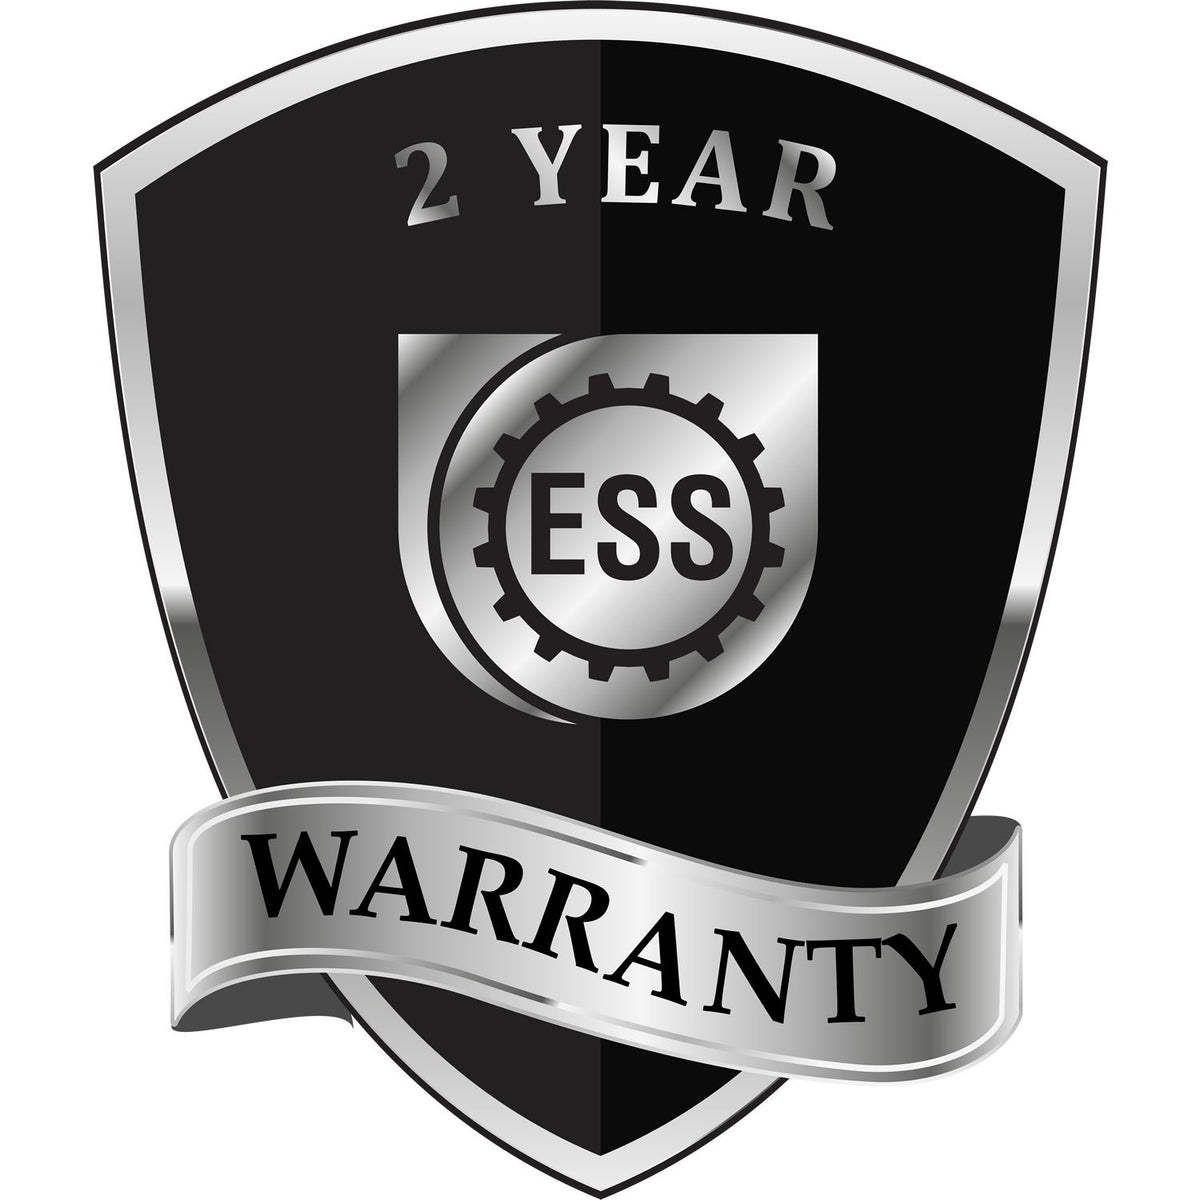 A badge or emblem showing a warranty icon for the Long Reach Tennessee PE Seal